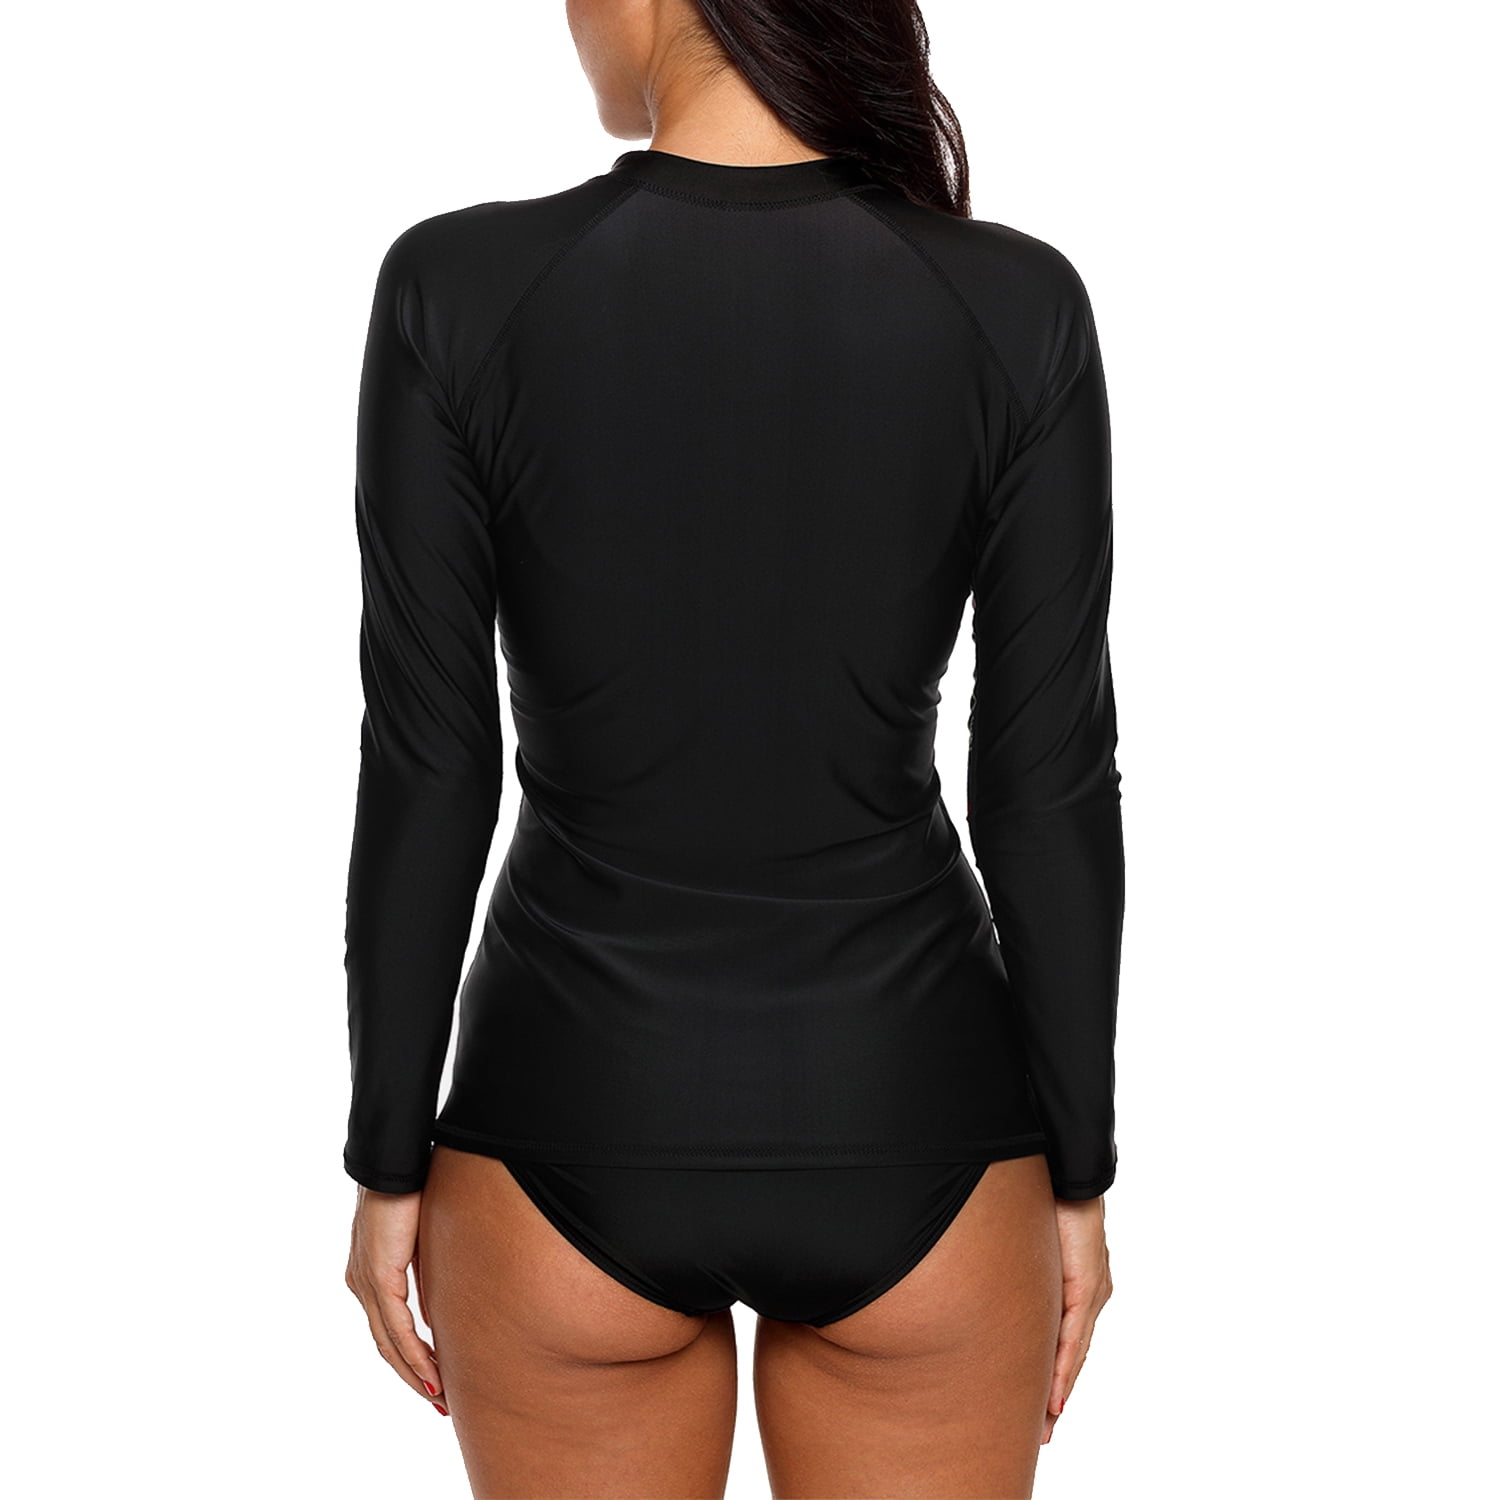 Uhnice Womens UPF 50 Athletic Rash Guards Zip Front Long Sleeve Swimsuit Top 